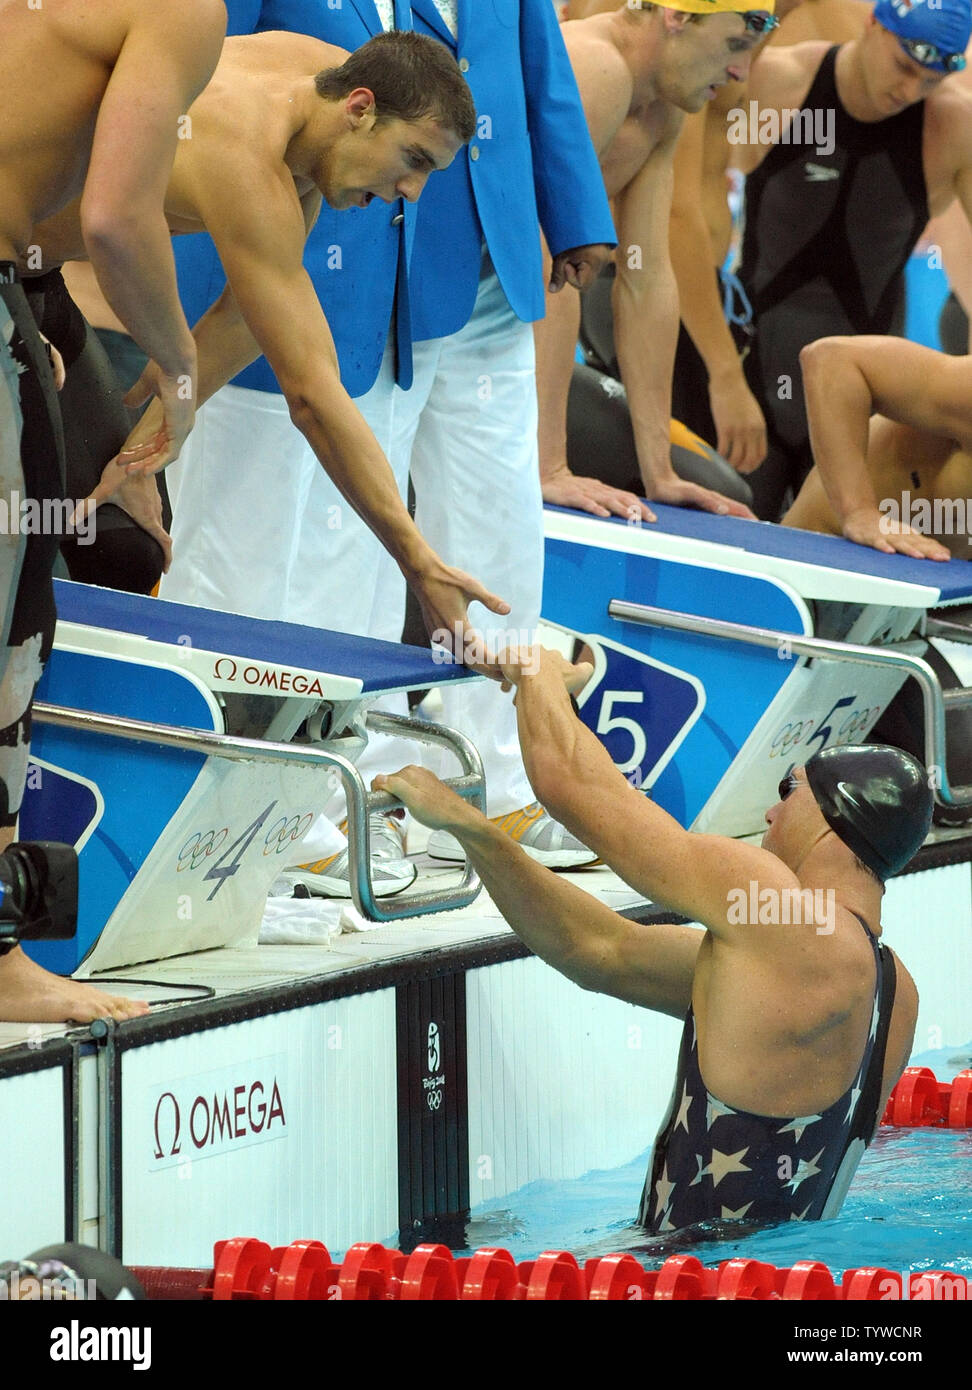 USA's Michael Phelps leans down to shake hands with Jason Lezak after the US team won the Men's 4x100M Medley, setting a world record of 3:29.34, at the National Aquatic Center (Water Cube) during the 2008 Summer Olympics in Beijing, China, on August 17, 2008.  Phelps set the world record for medals in a single Olympics with 8, passing Mark Spitz.    (UPI Photo/Roger L. Wollenberg) Stock Photo